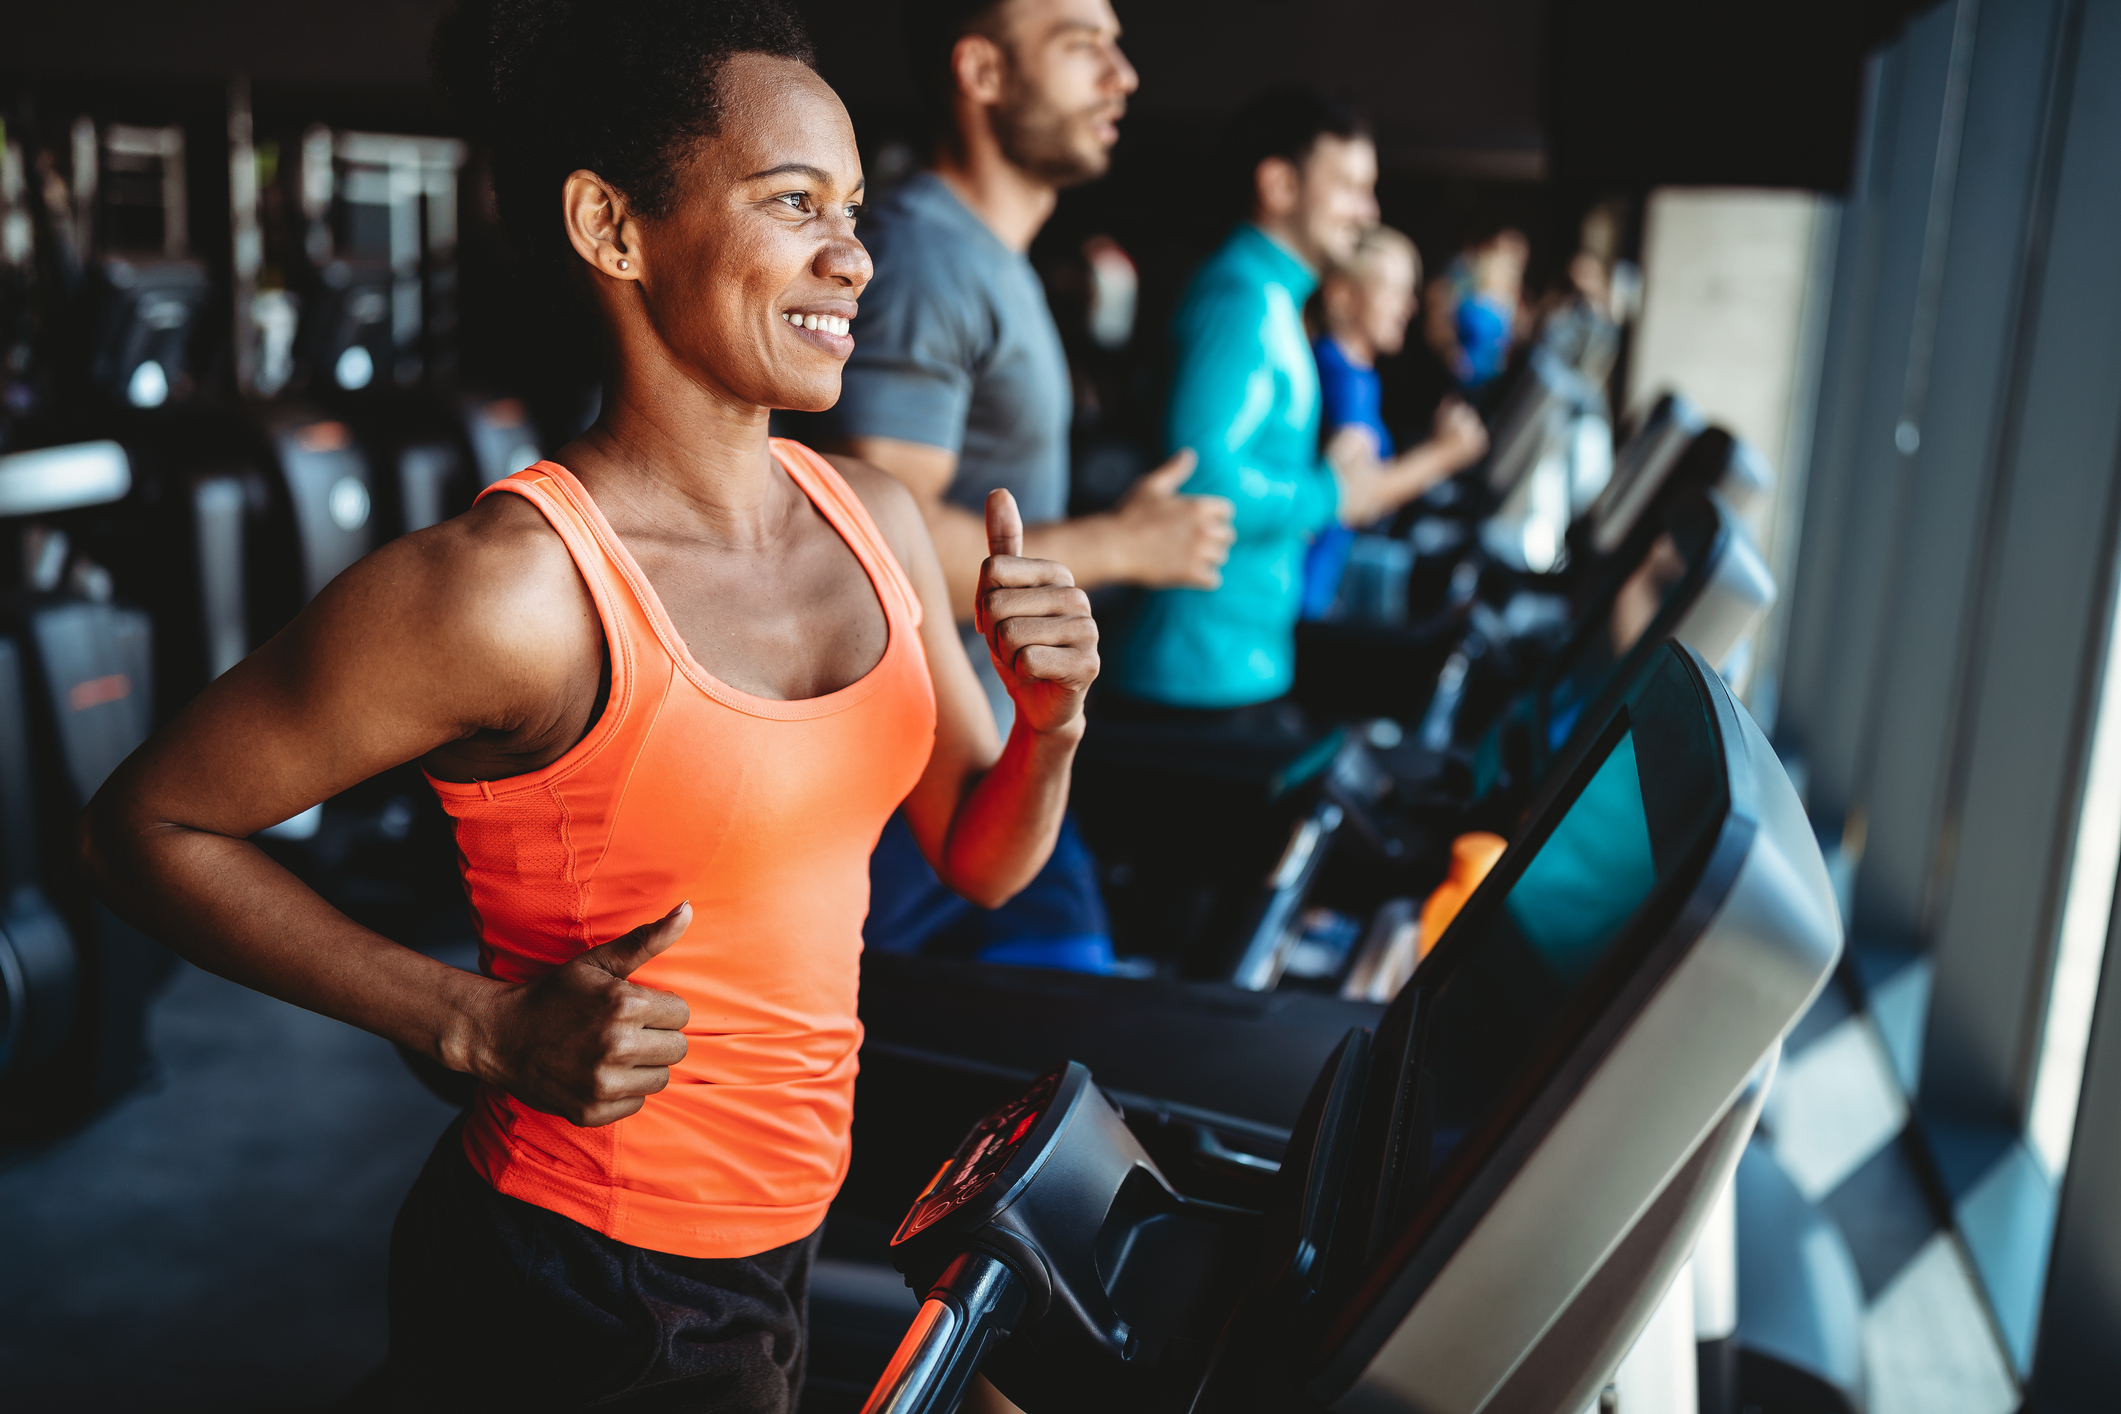 Sweat it Out at This Gym in League City for a Healthier You